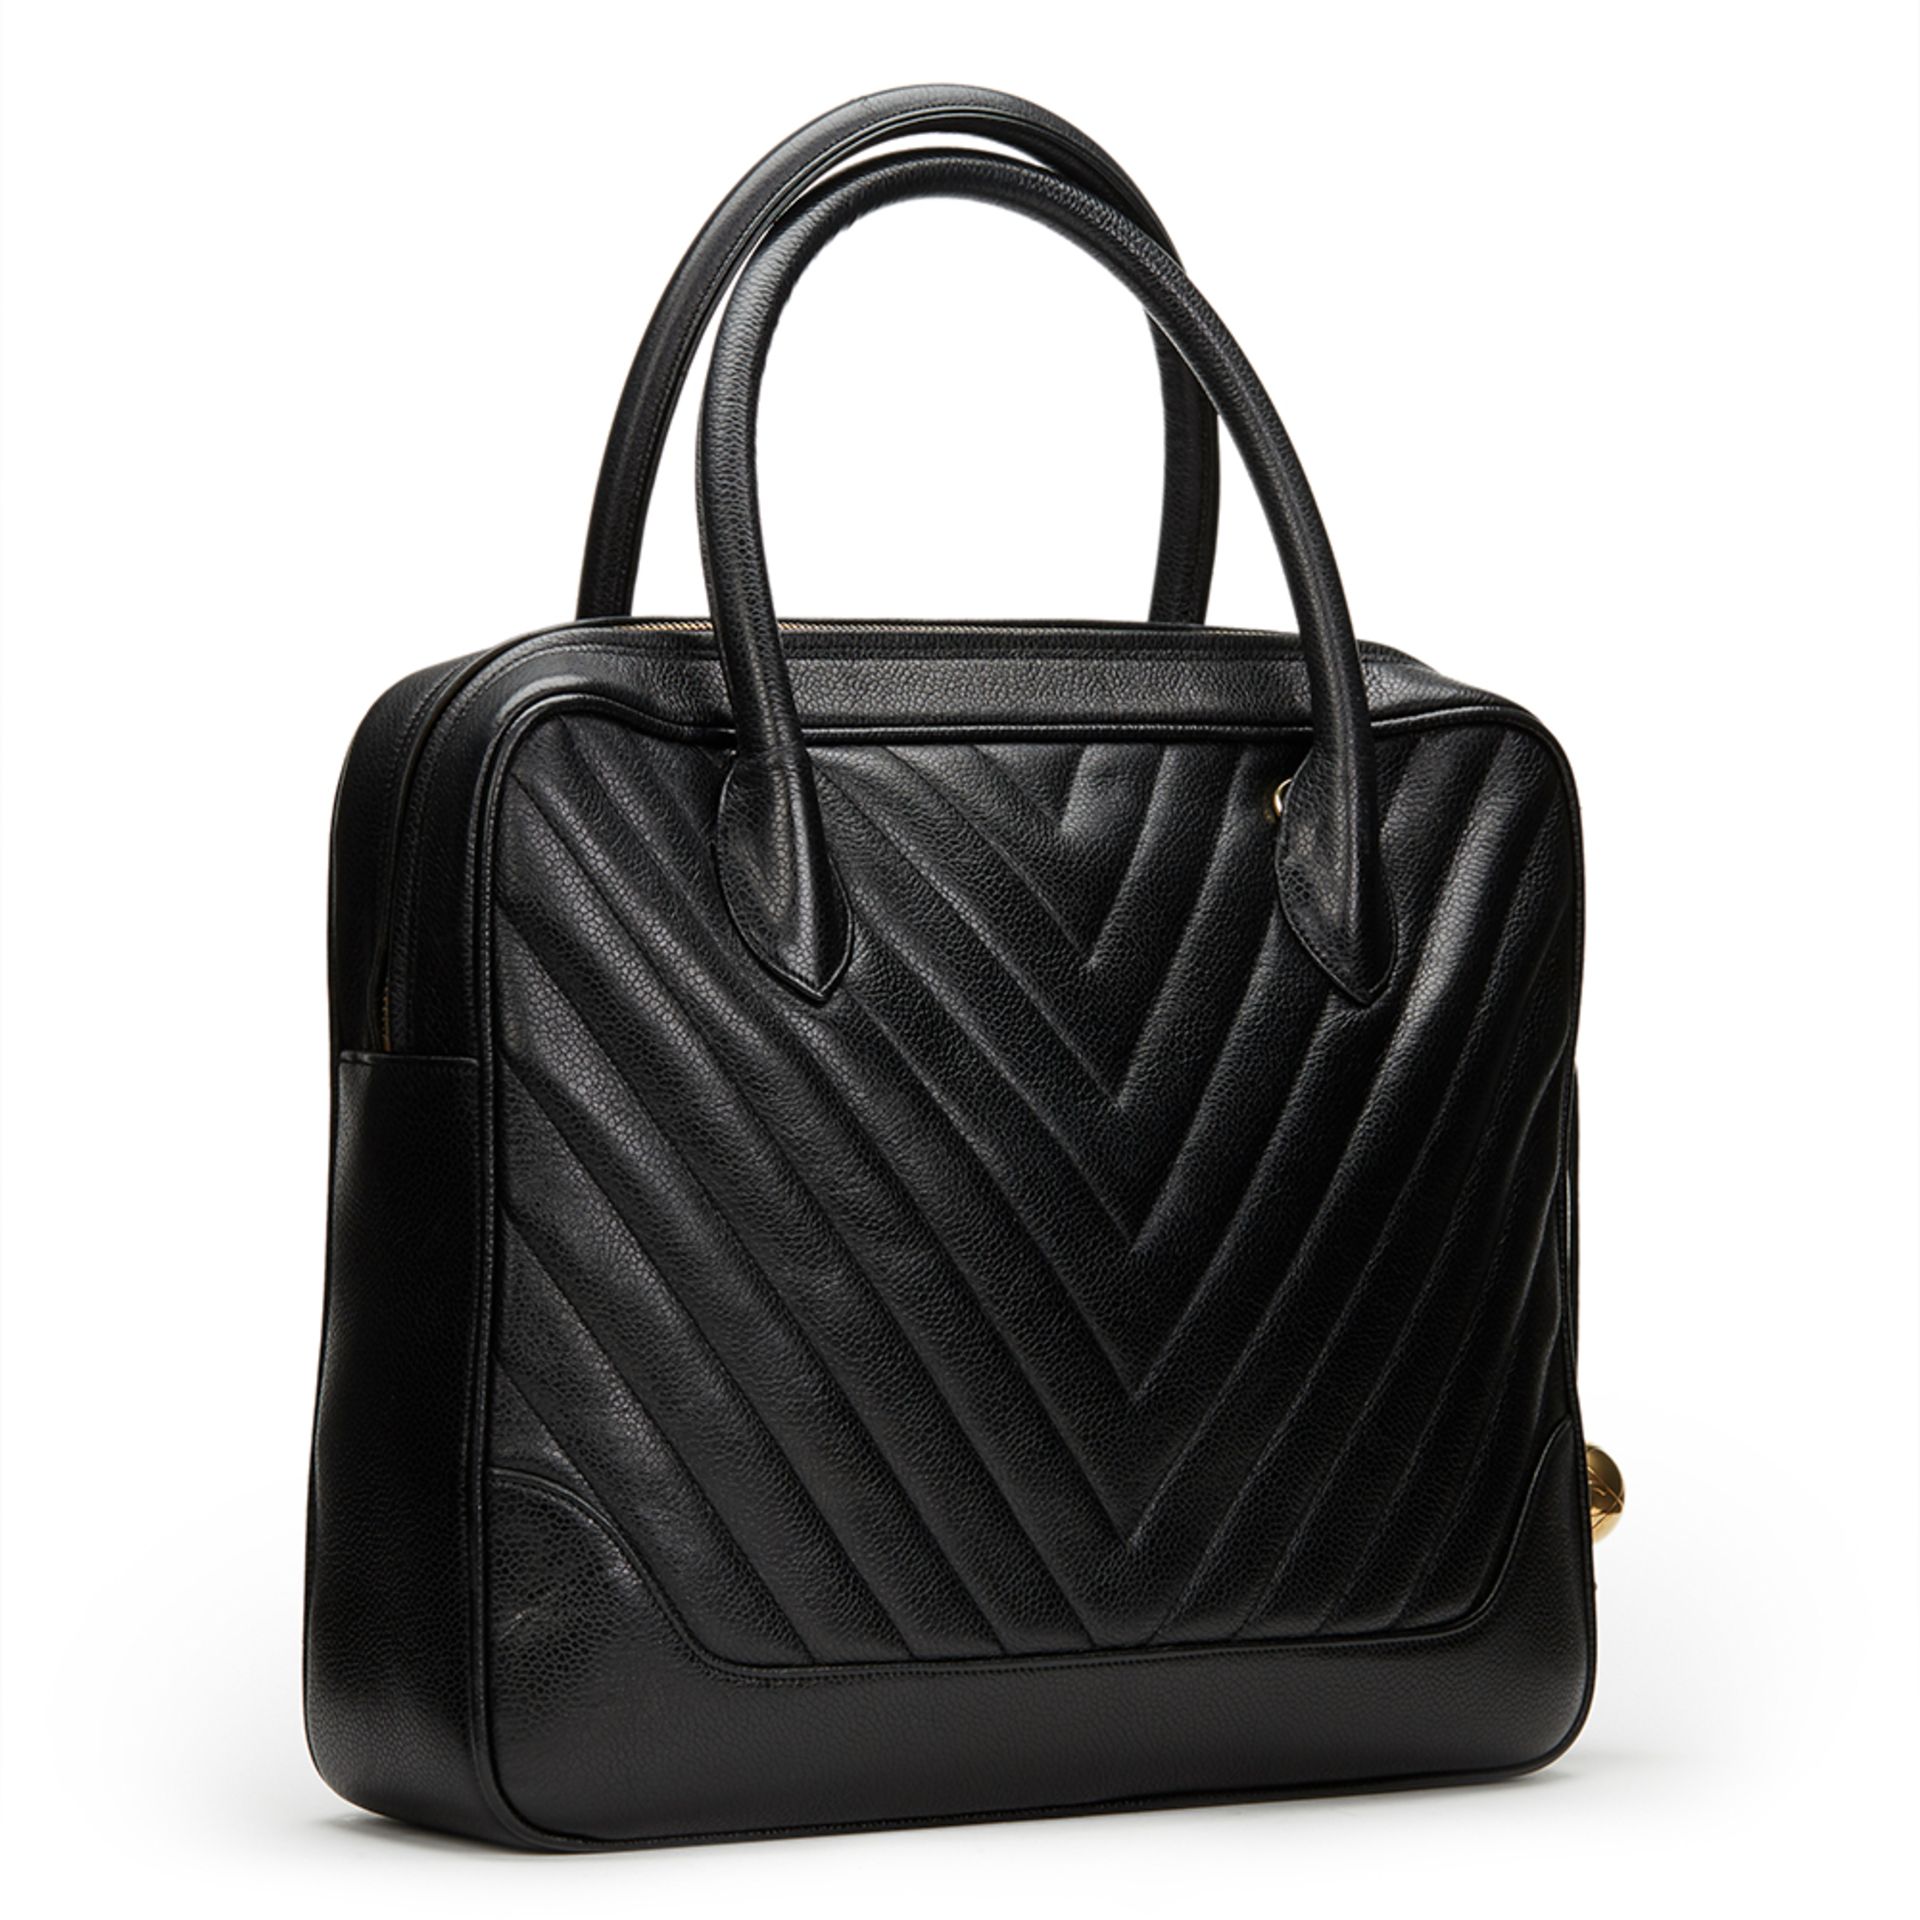 Black Chevron Quilted Caviar Leather 2 Way Shoulder Tote - Image 5 of 9